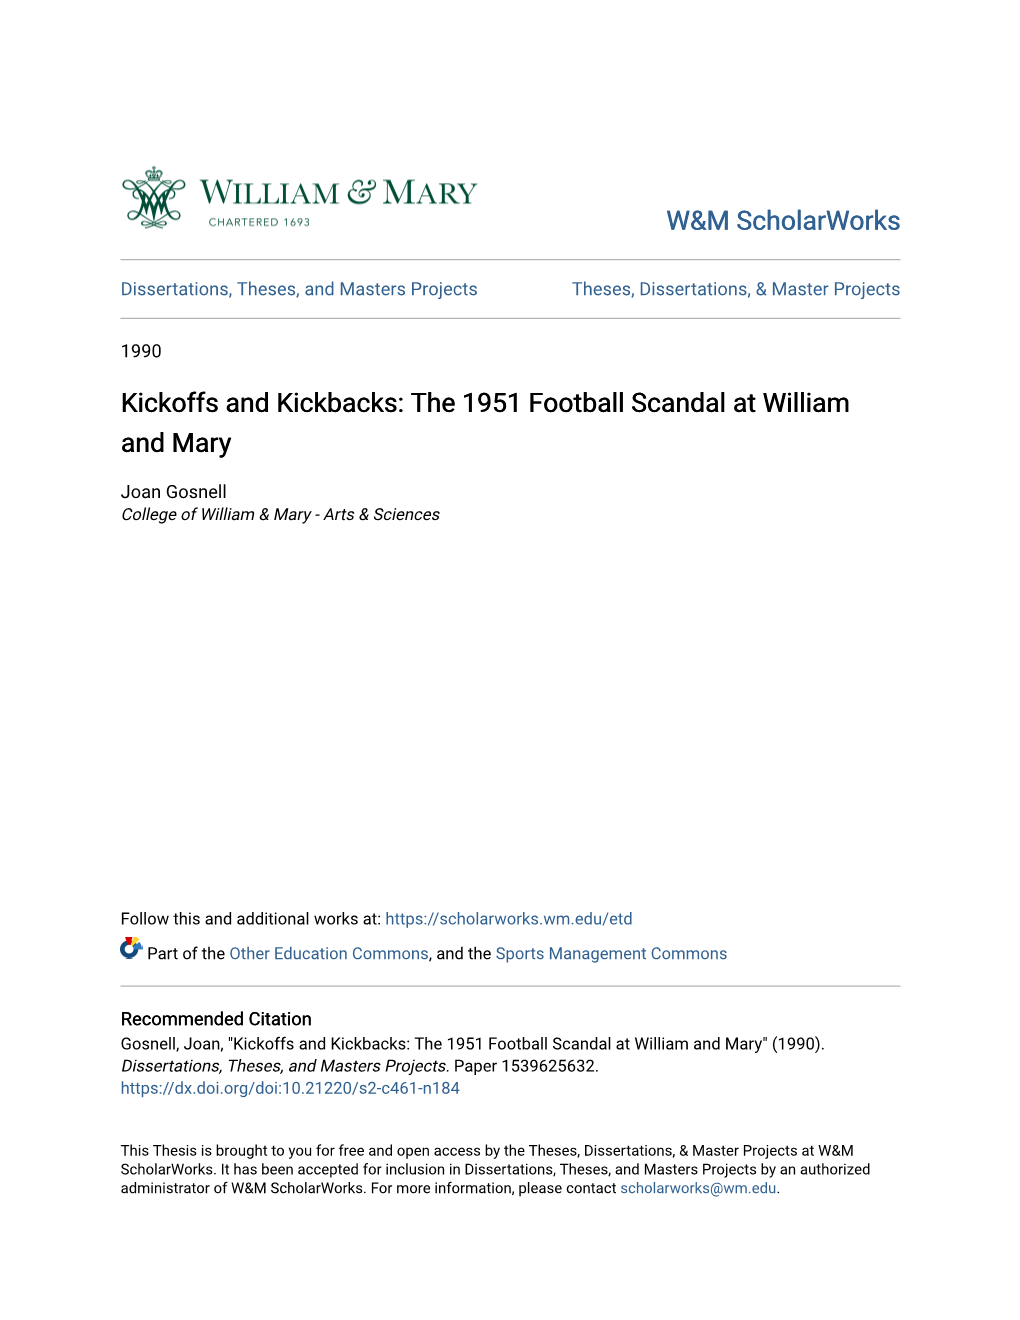 The 1951 Football Scandal at William and Mary